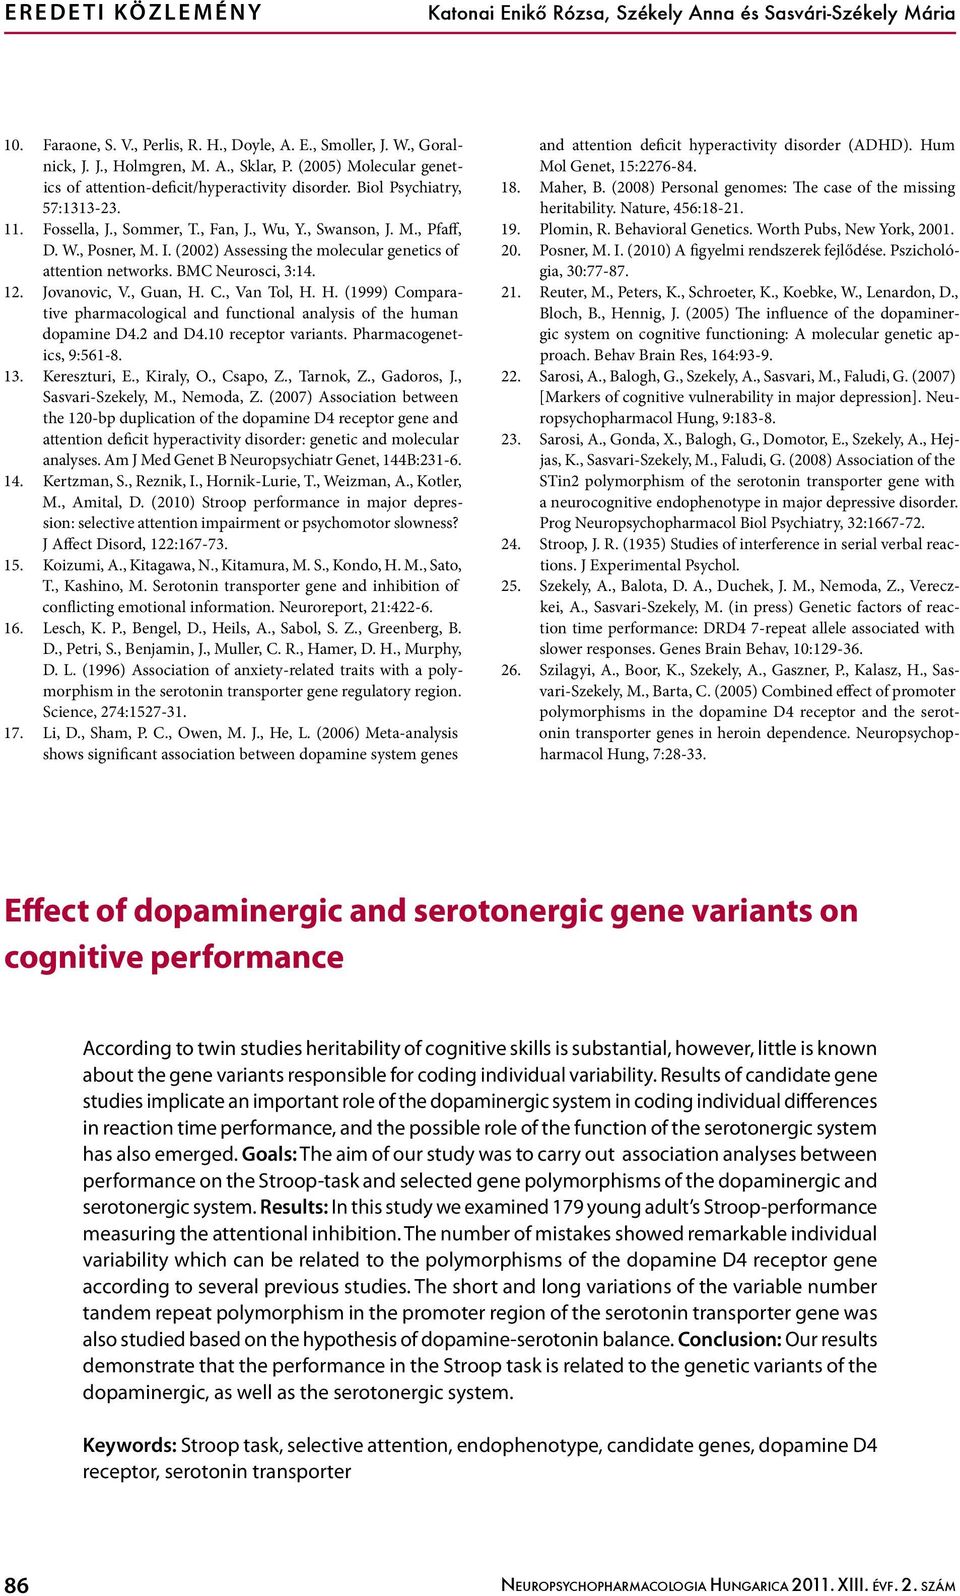 (2002) Assessing the molecular genetics of attention networks. BMC Neurosci, 3:14. 12. Jovanovic, V., Guan, H. C., Van Tol, H. H. (1999) Comparative pharmacological and functional analysis of the human dopamine D4.